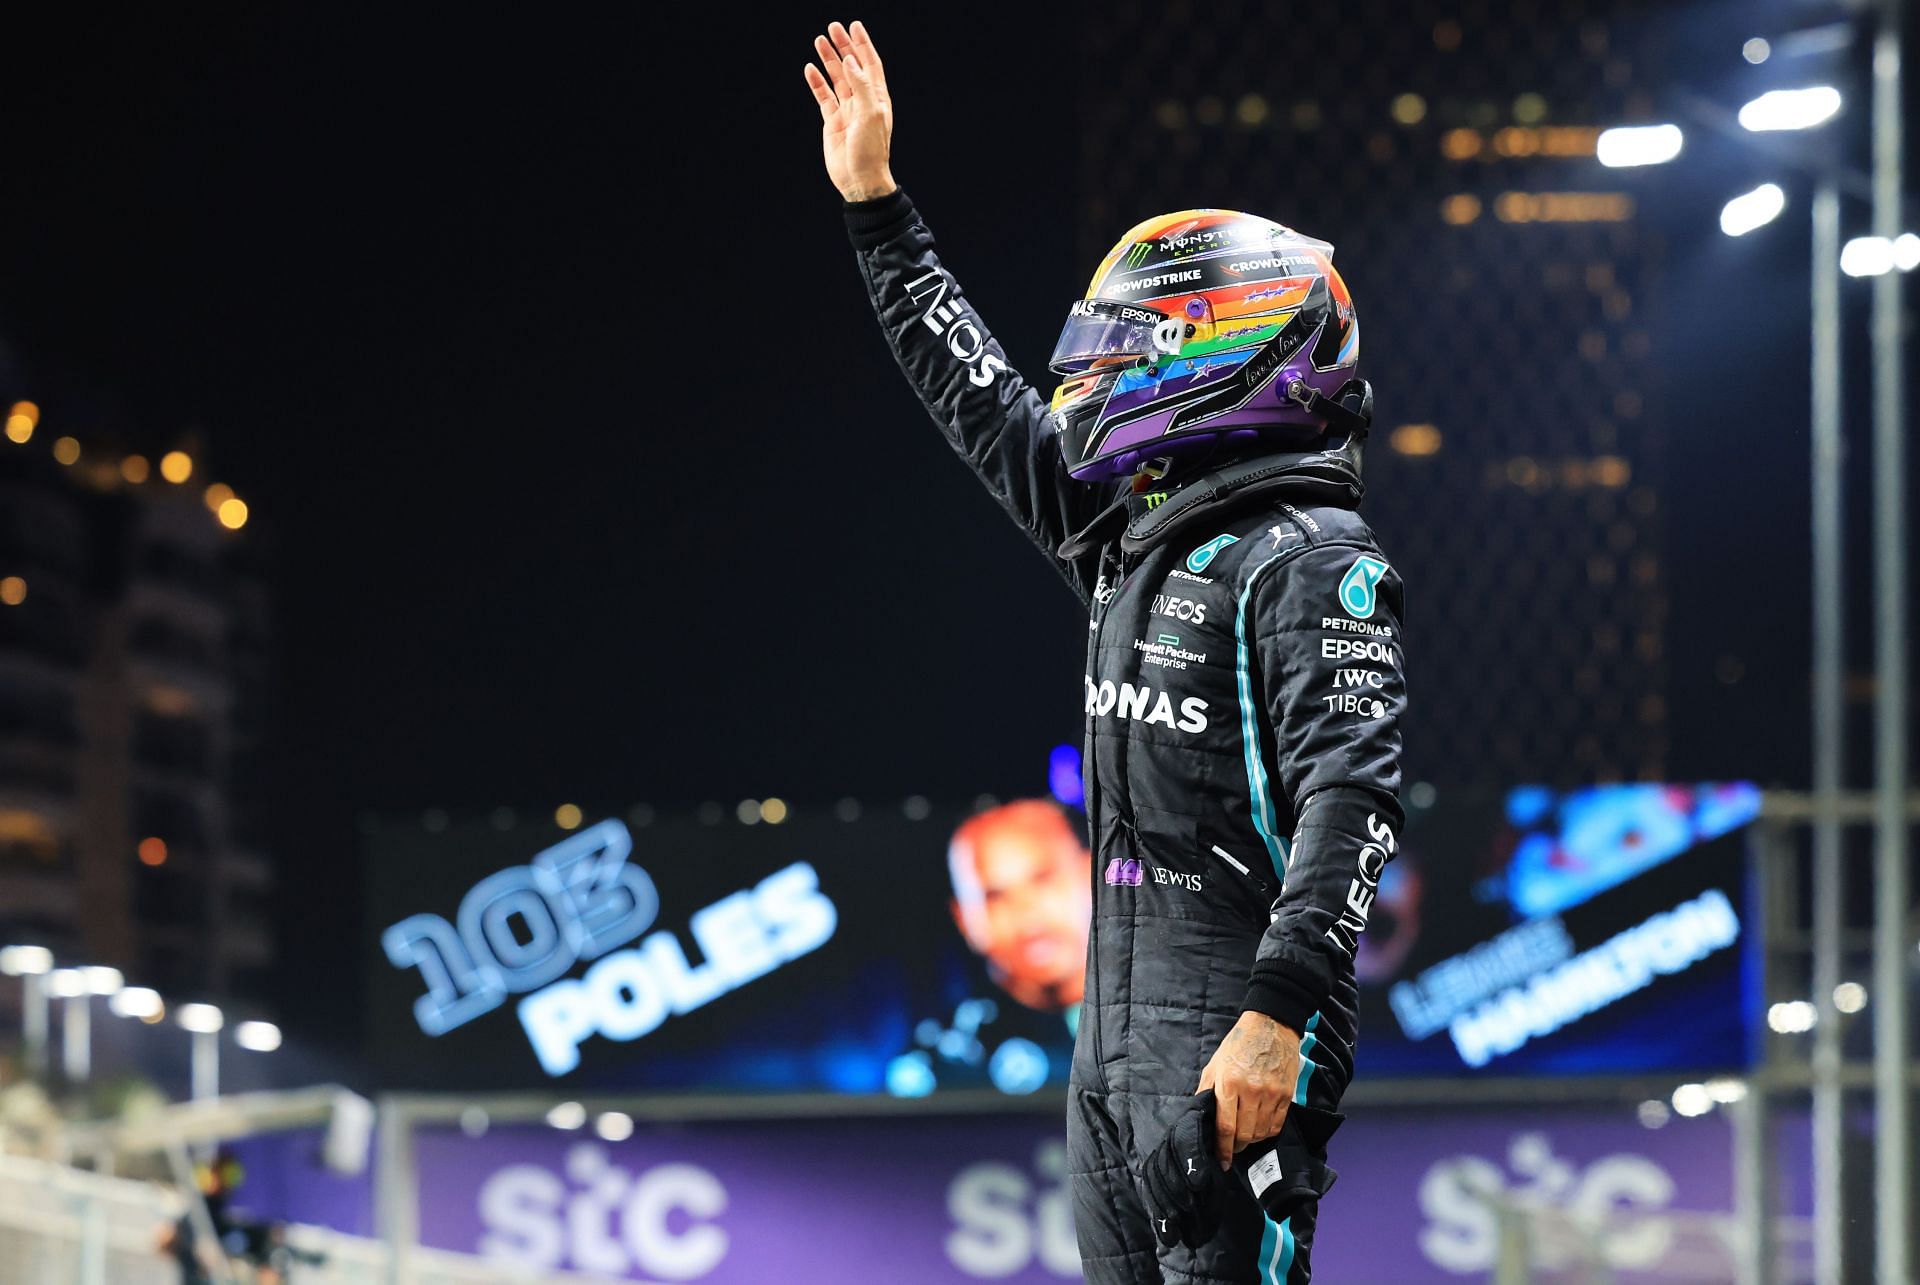 F1 Grand Prix of Saudi Arabia - Lewis Hamilton takes pole position in the qualifying session on Sunday.